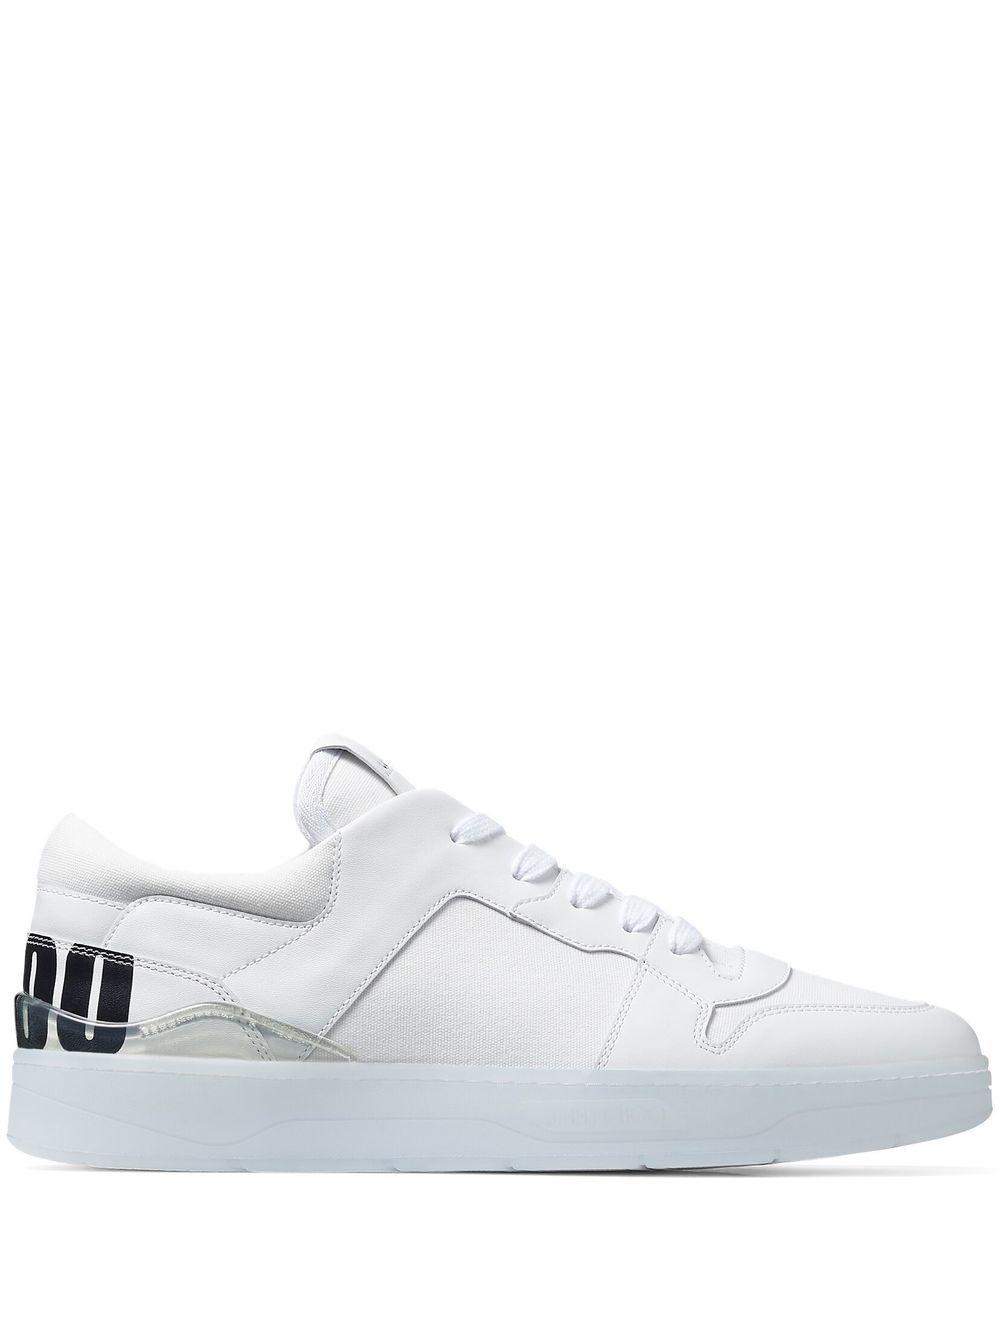 Jimmy Choo Florent/m Low-top Sneakers in White for Men | Lyst